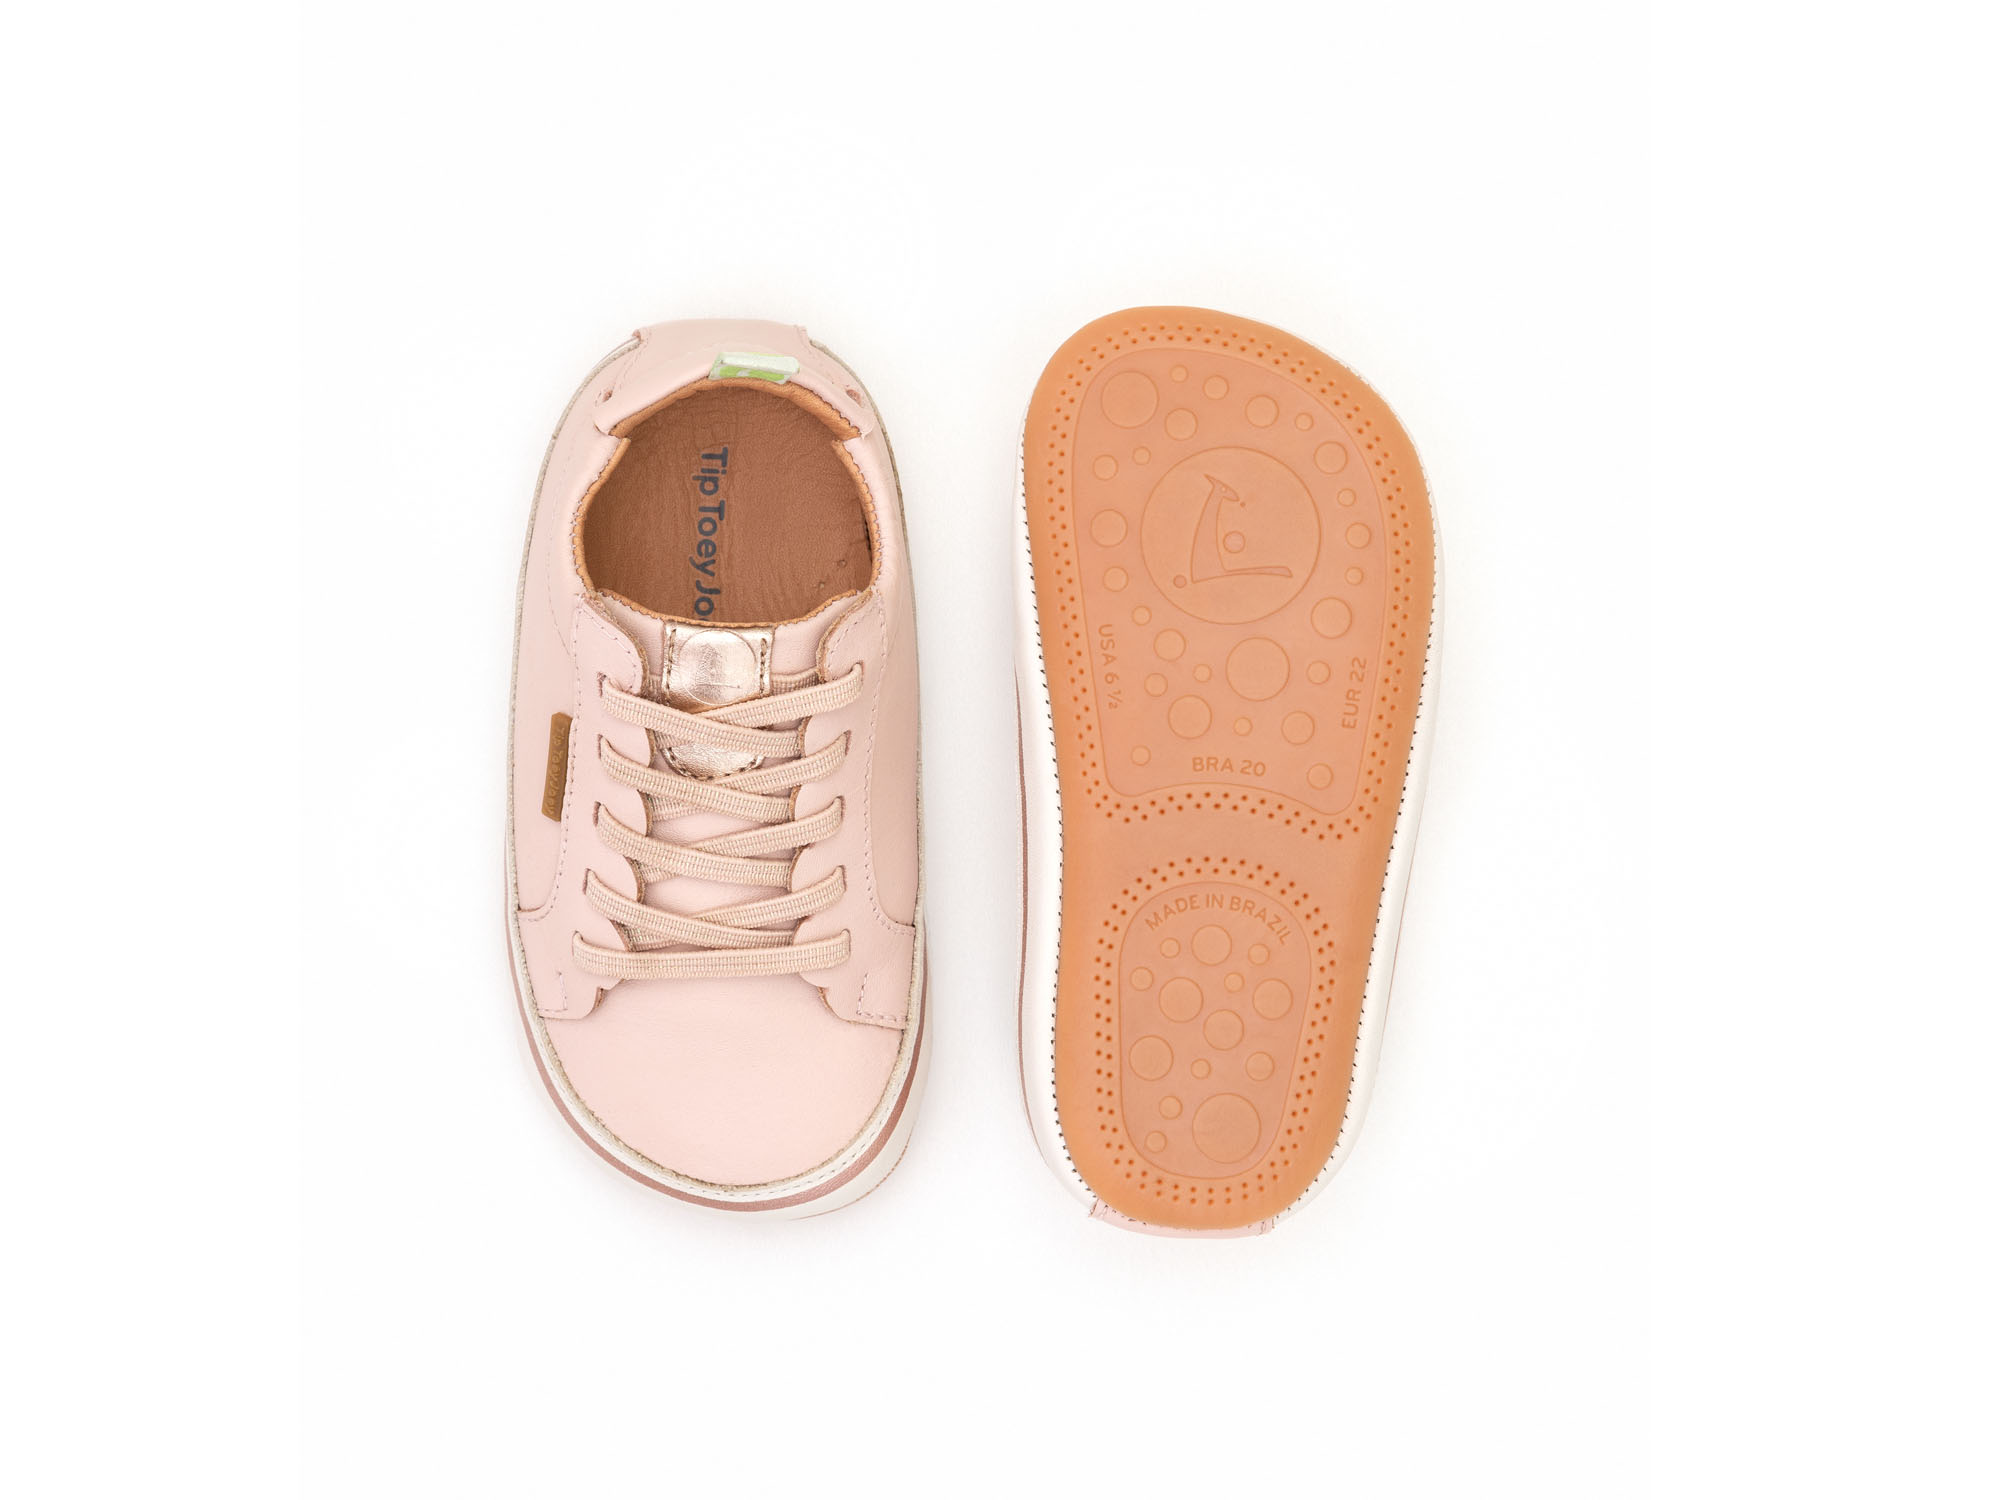 UP & GO Sneakers for Girls Puffy | Tip Toey Joey - Australia - 3